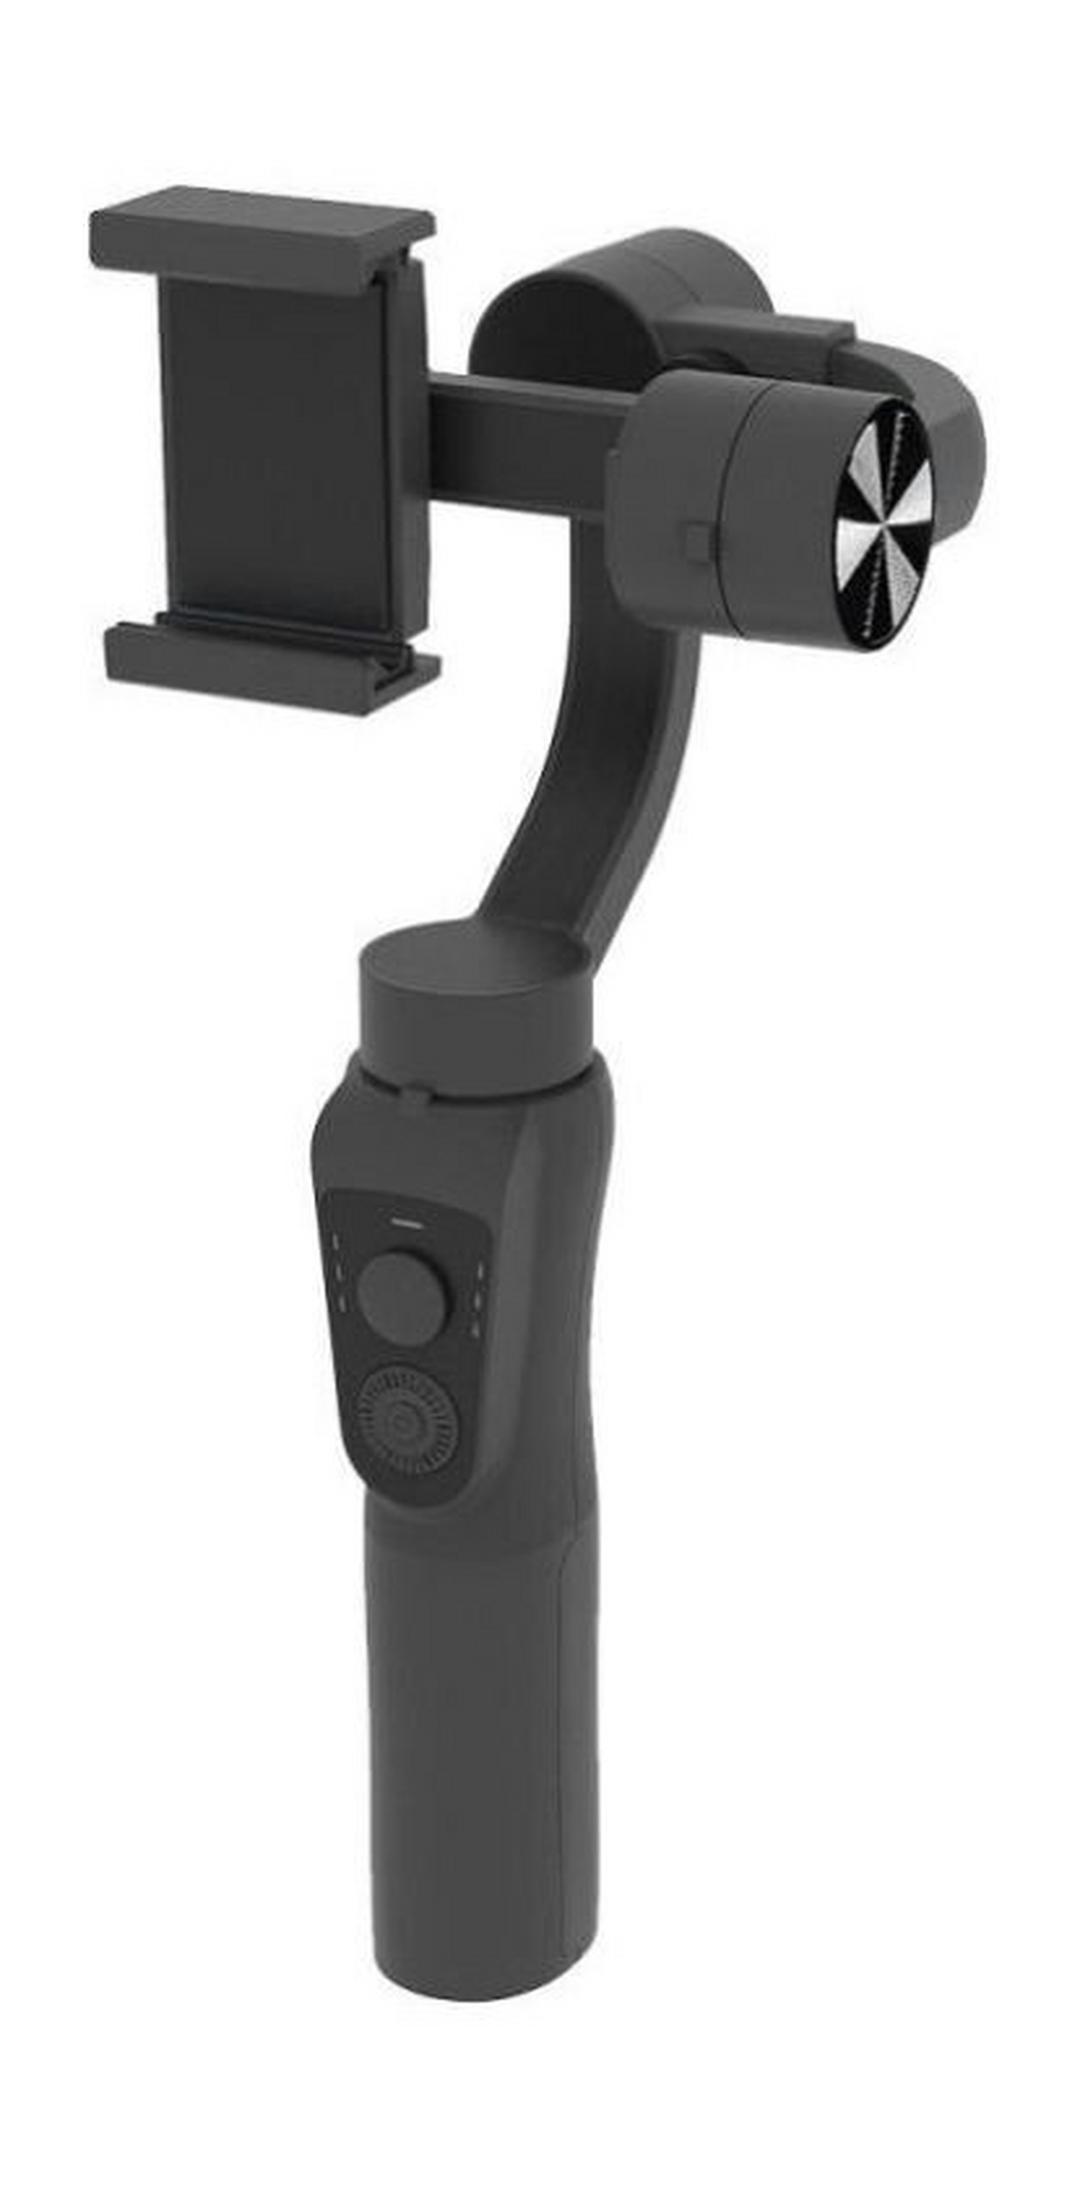 PNY Mobee 3-axis Gimbal Stabilizer - Black